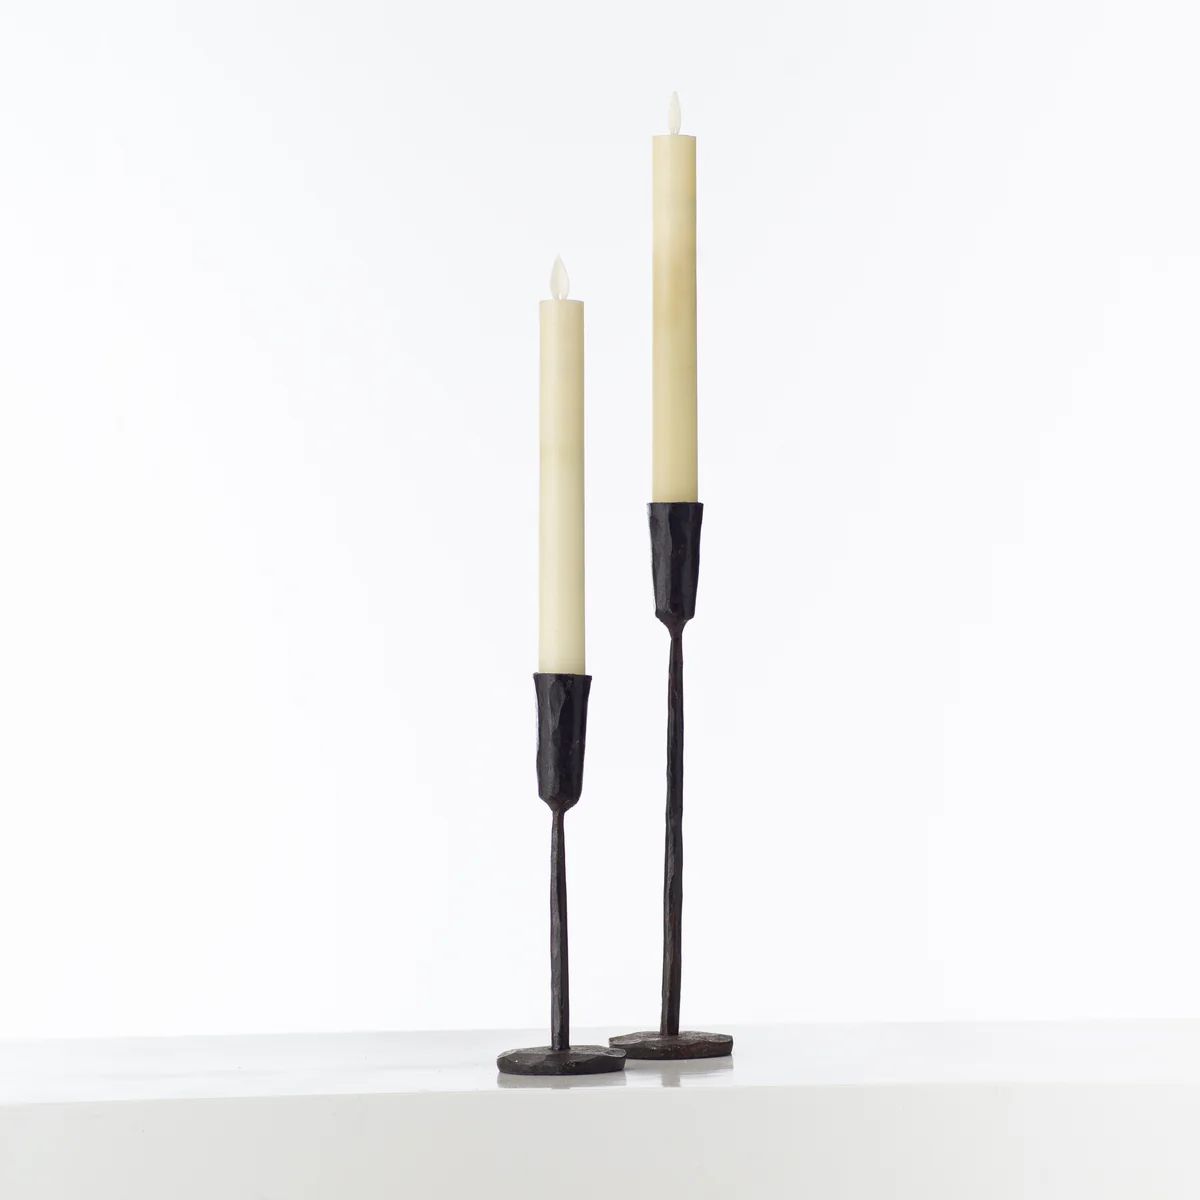 Moving Flameless LED Cream 9" Taper Candles with Remote Set of 2 | Darby Creek Trading